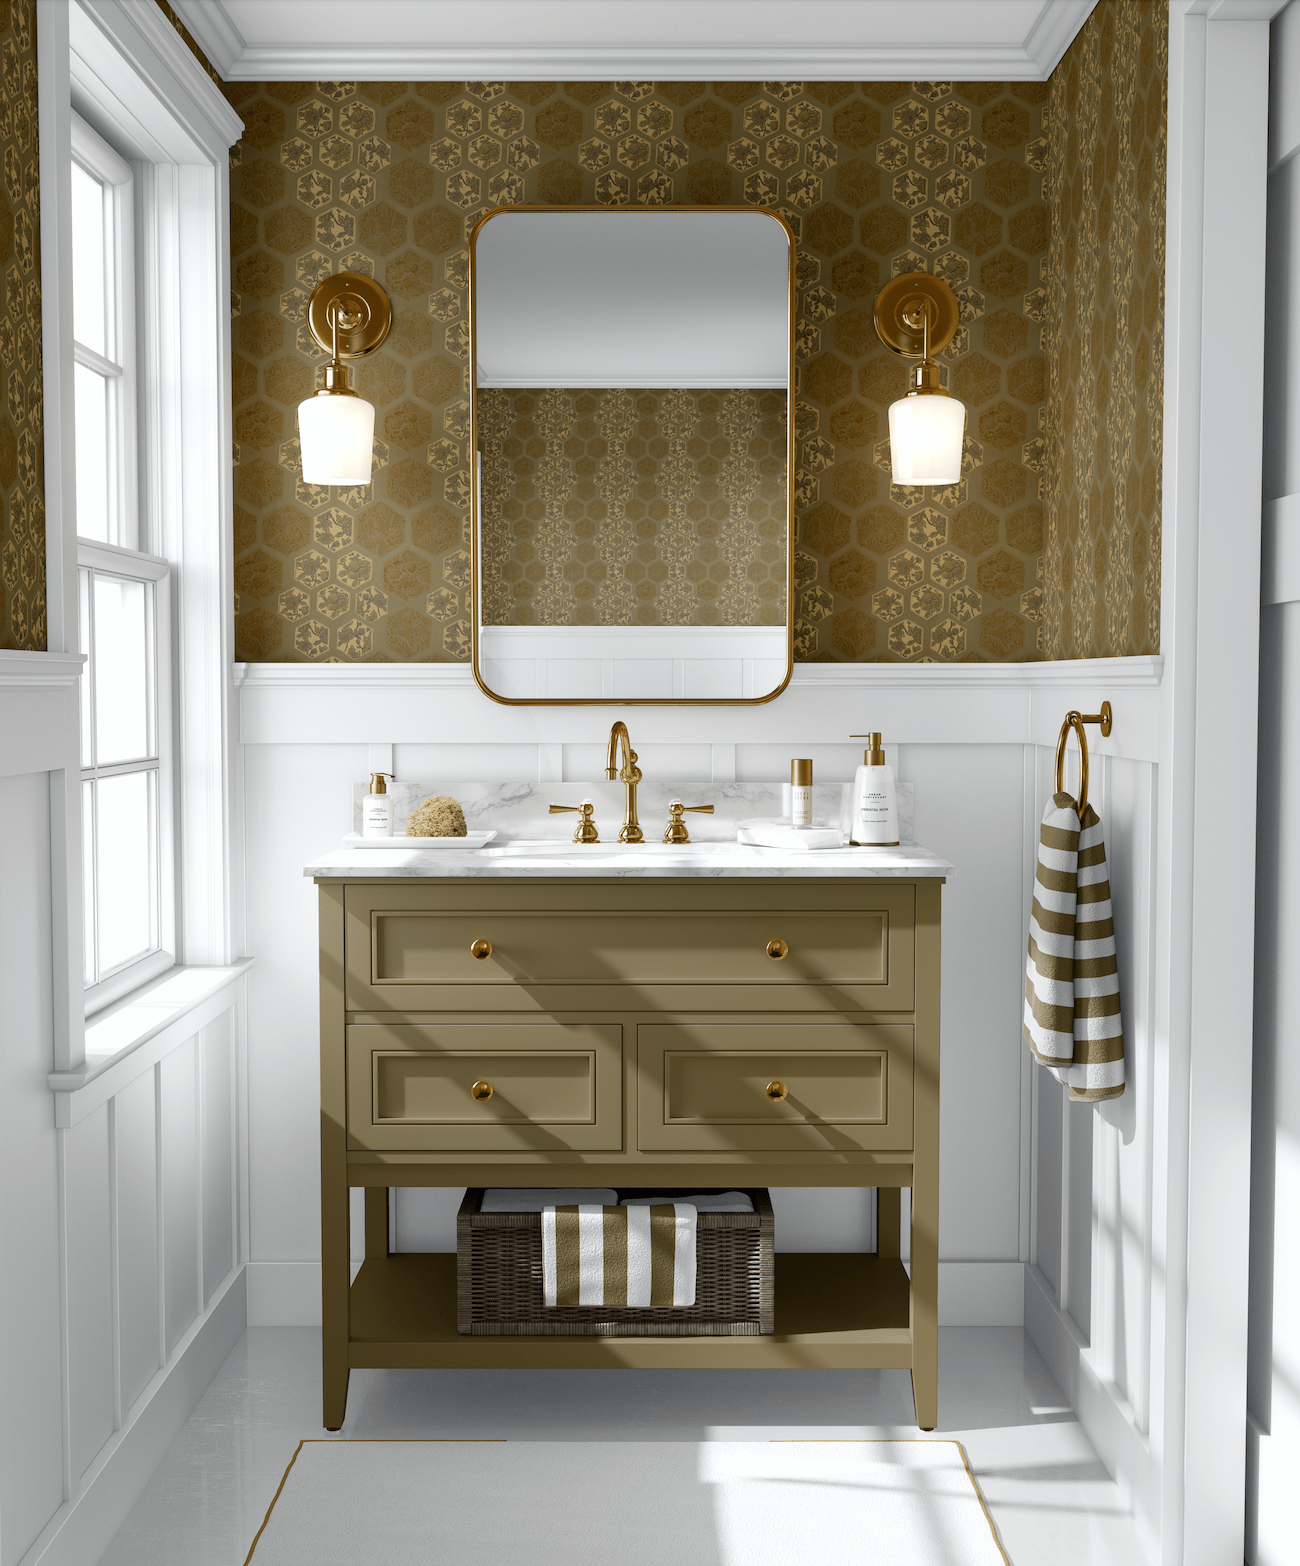 peel and stick removable midcentury wallpaper in brass bathroom